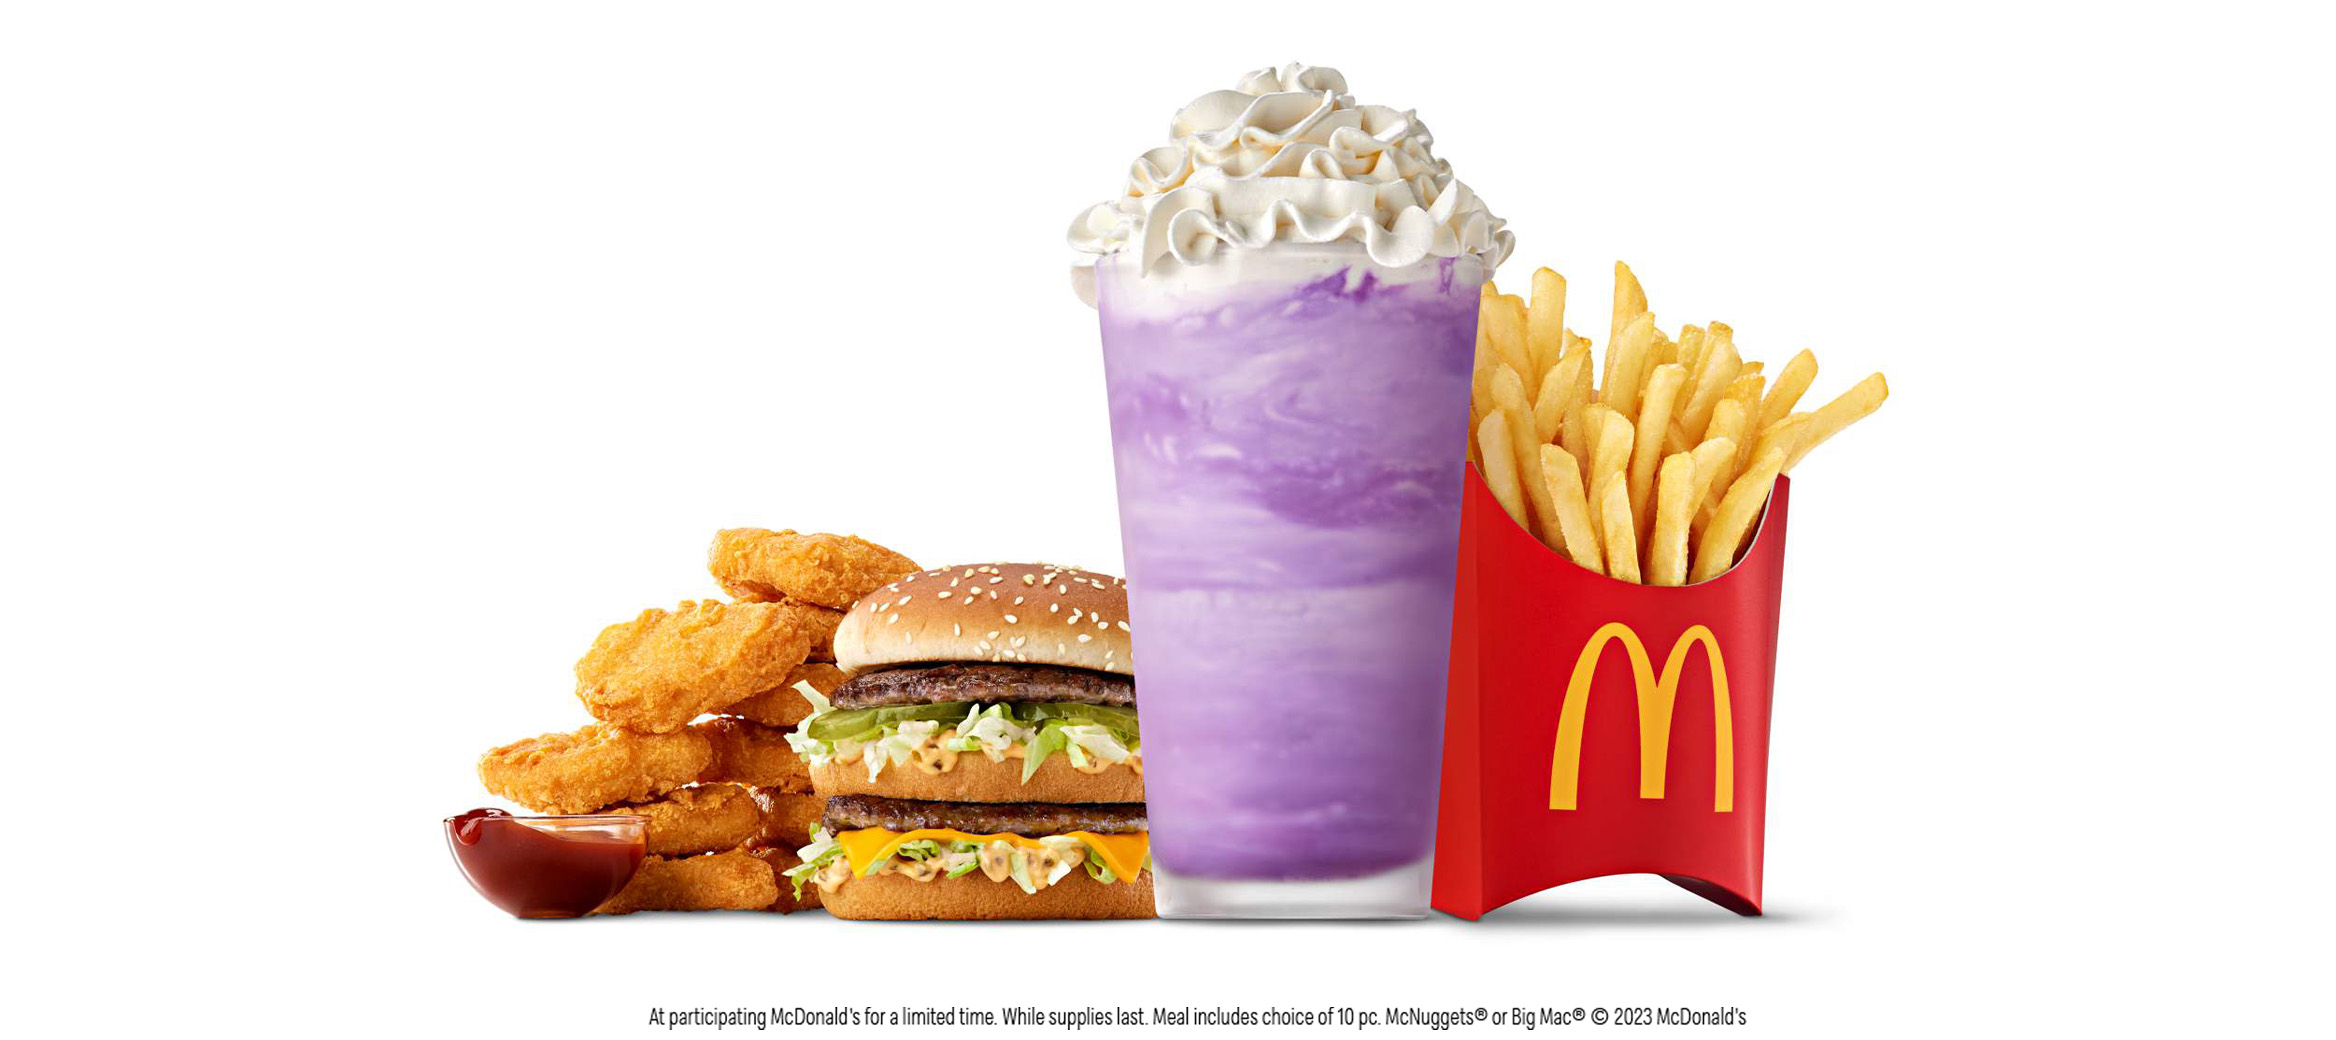 https://media.nbcchicago.com/2023/06/The-Grimace-Meal-and-Shake-1.jpg?quality=85&strip=all&fit=2336%2C1040